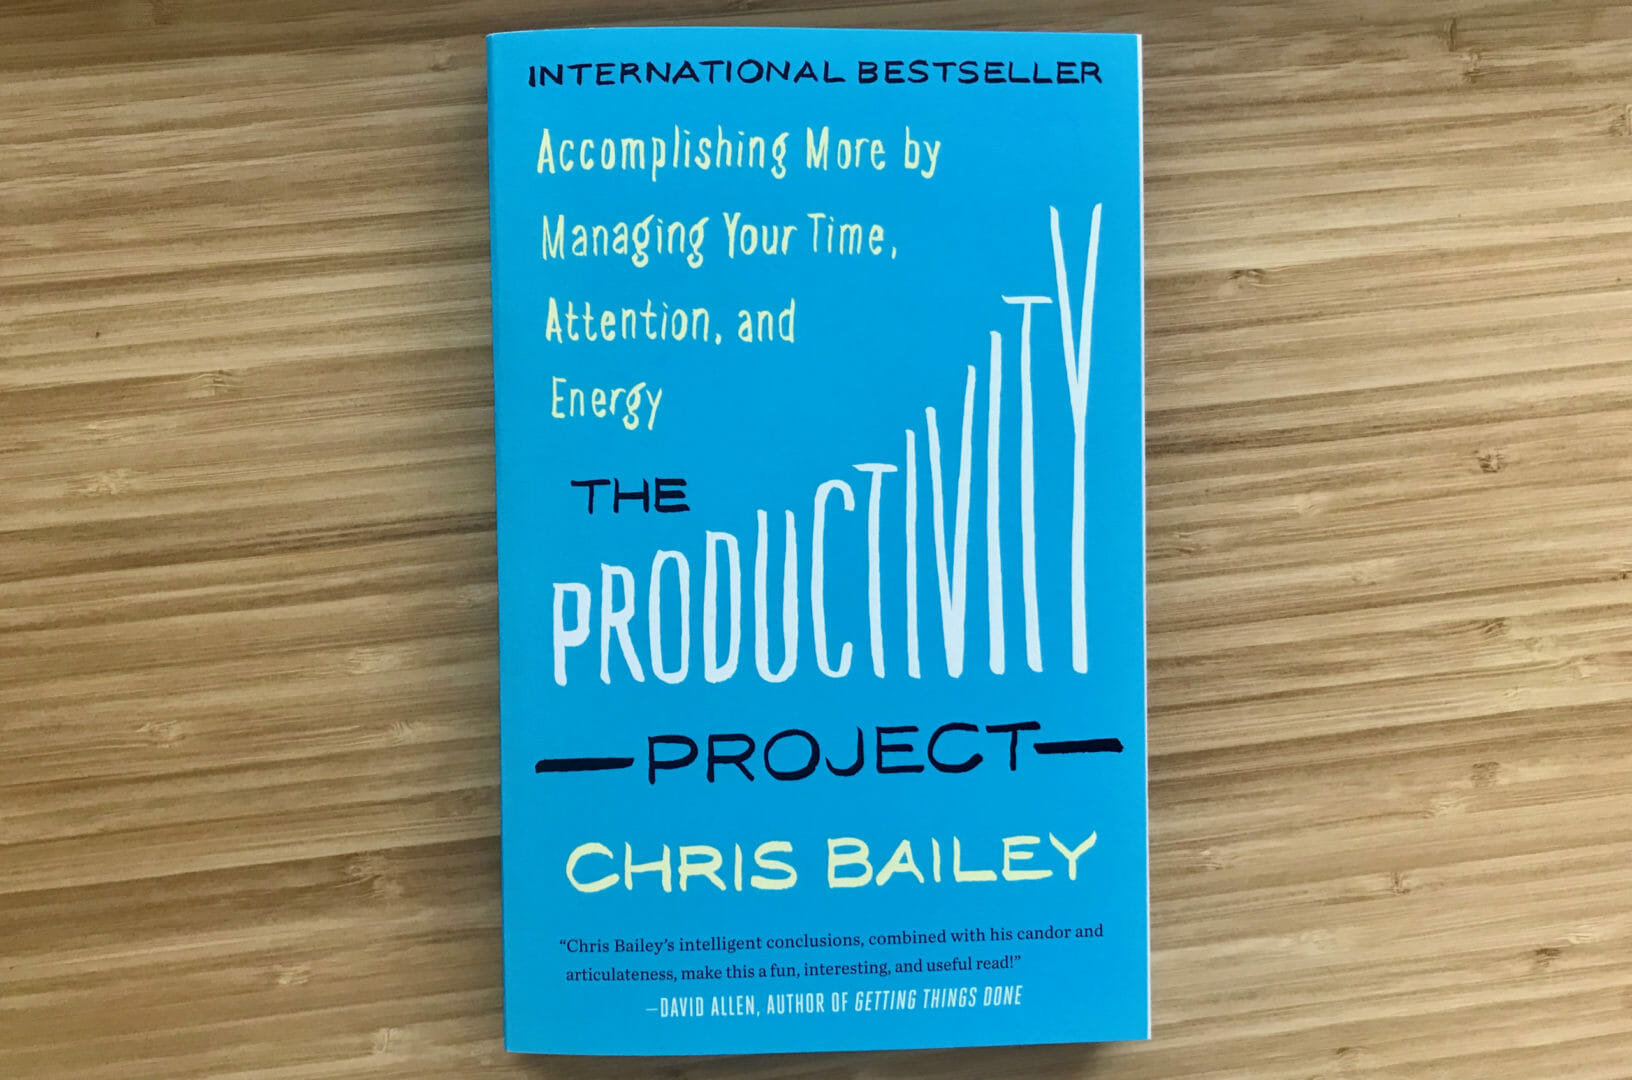 My book comes out in paperback TODAY! - Chris Bailey